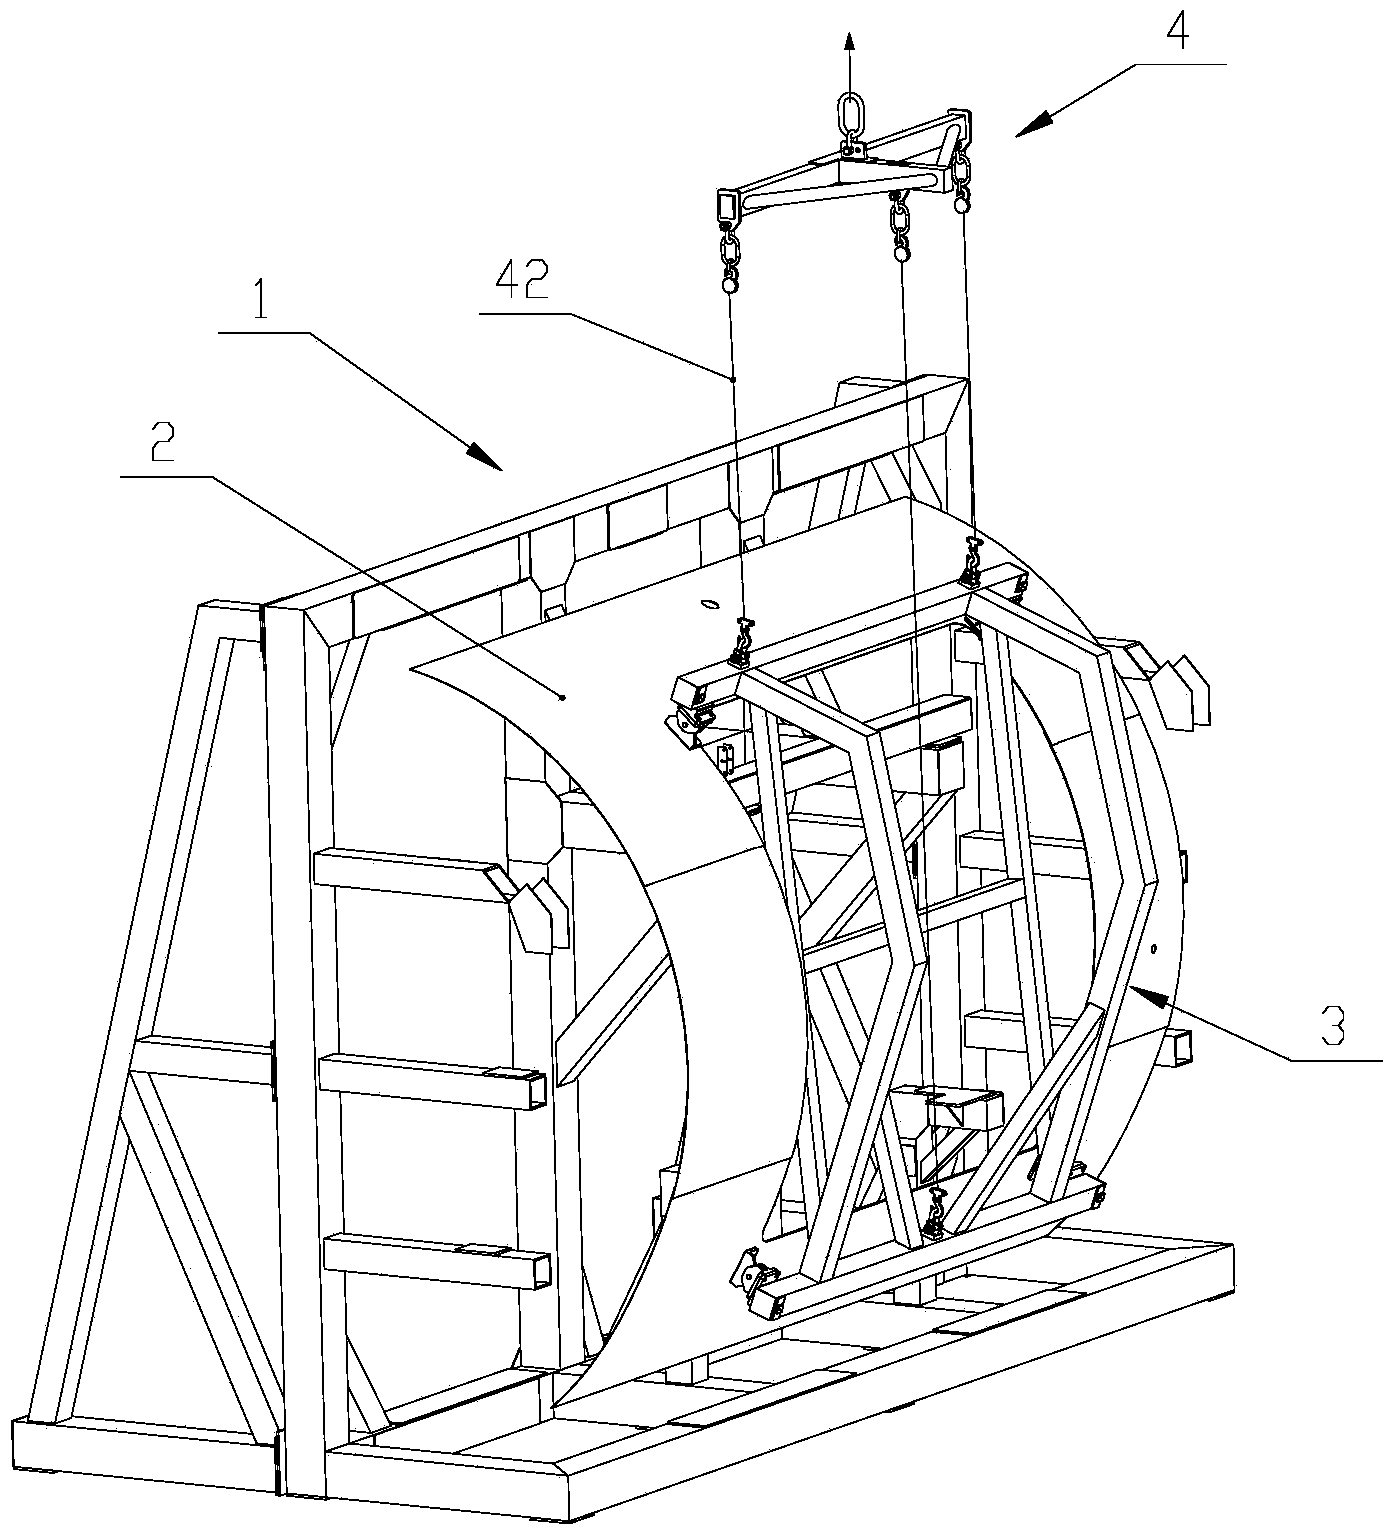 Method and tool for unloading wall panel assemblies at cargo space doors of airplanes